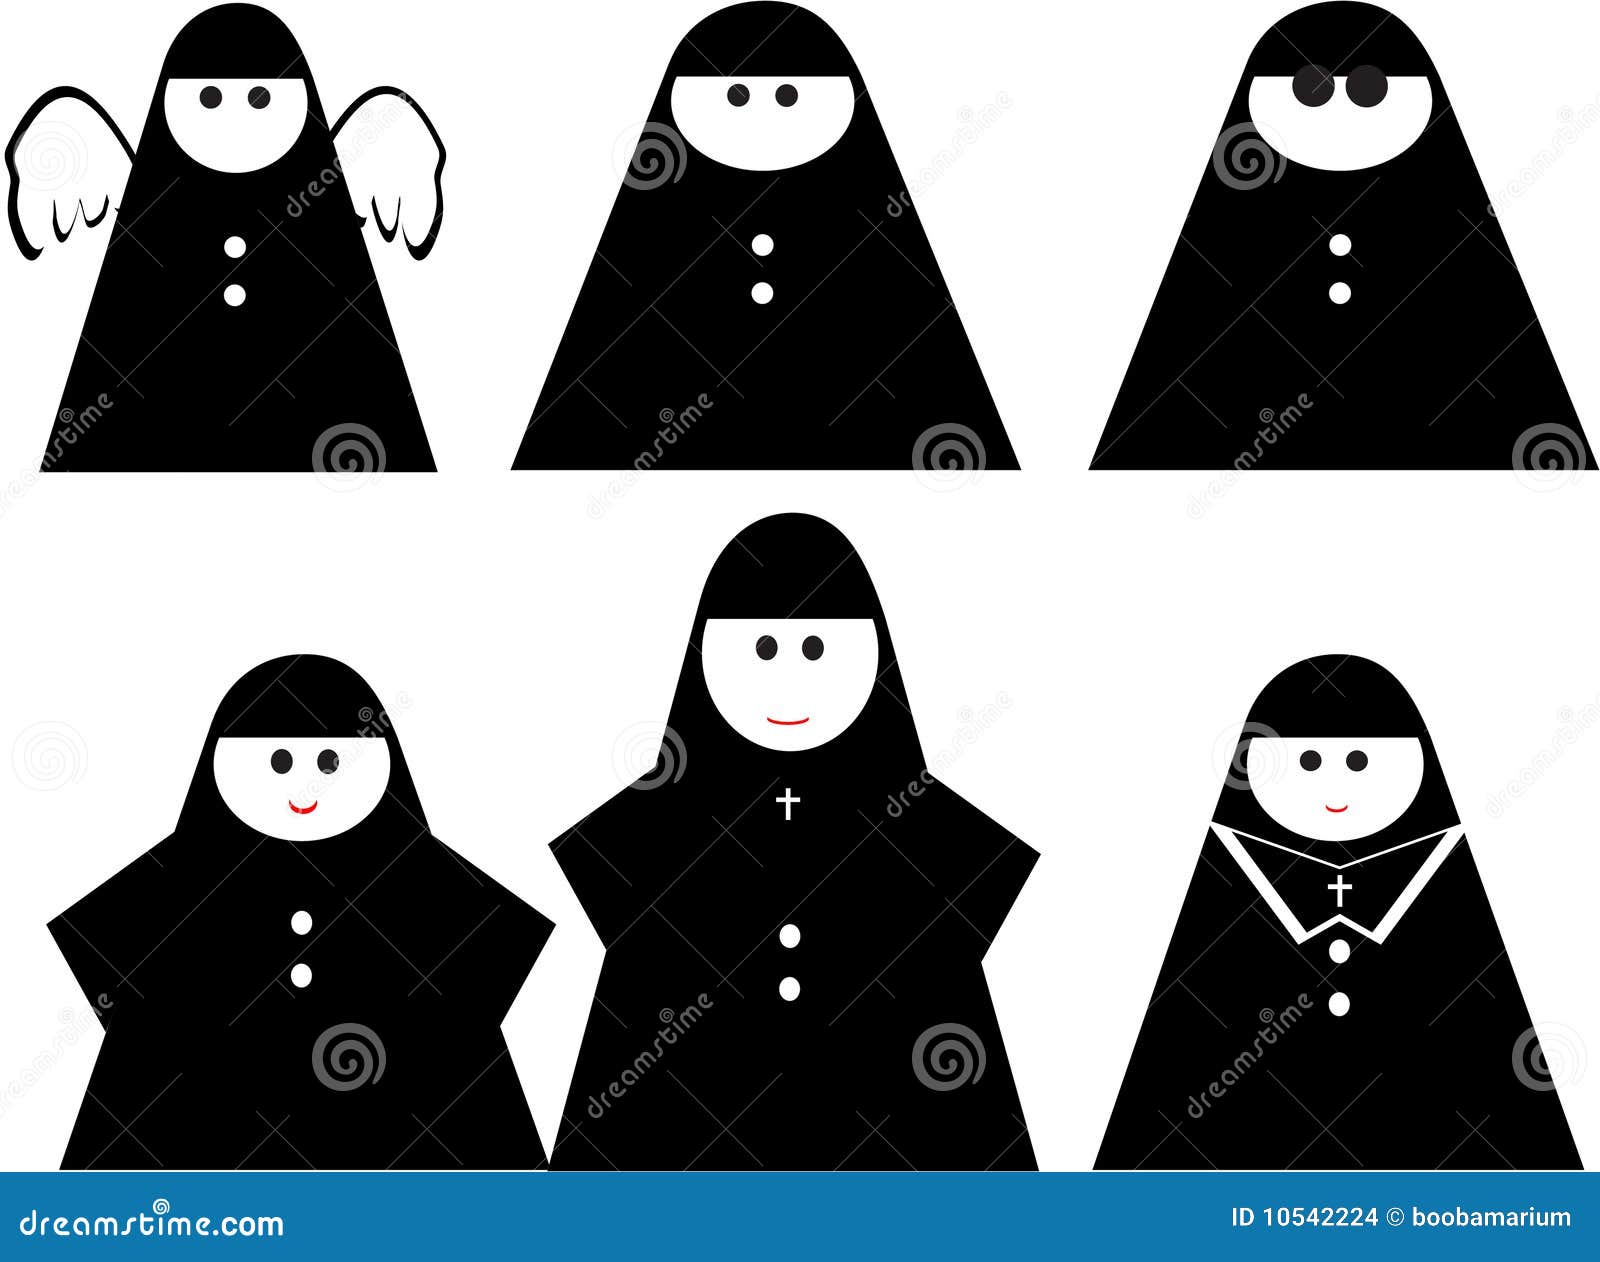 funny nun clipart images - photo #25